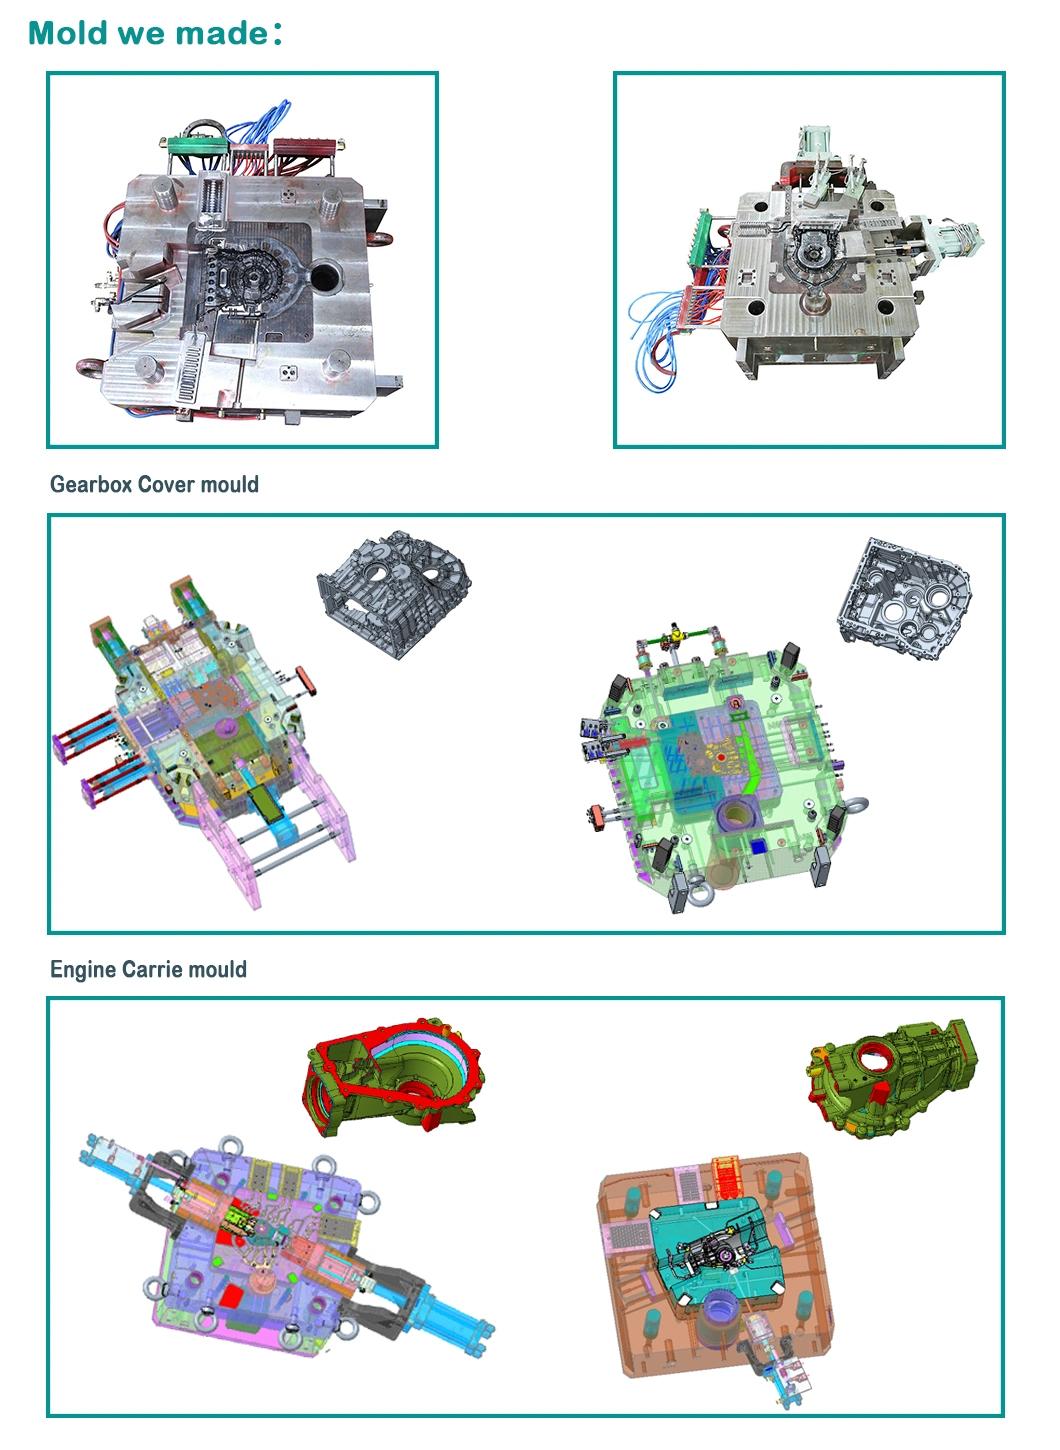 High Quality Competitive Price Customized Aluminum Zamak Hpdc Die Casting Mold for Auto Parts